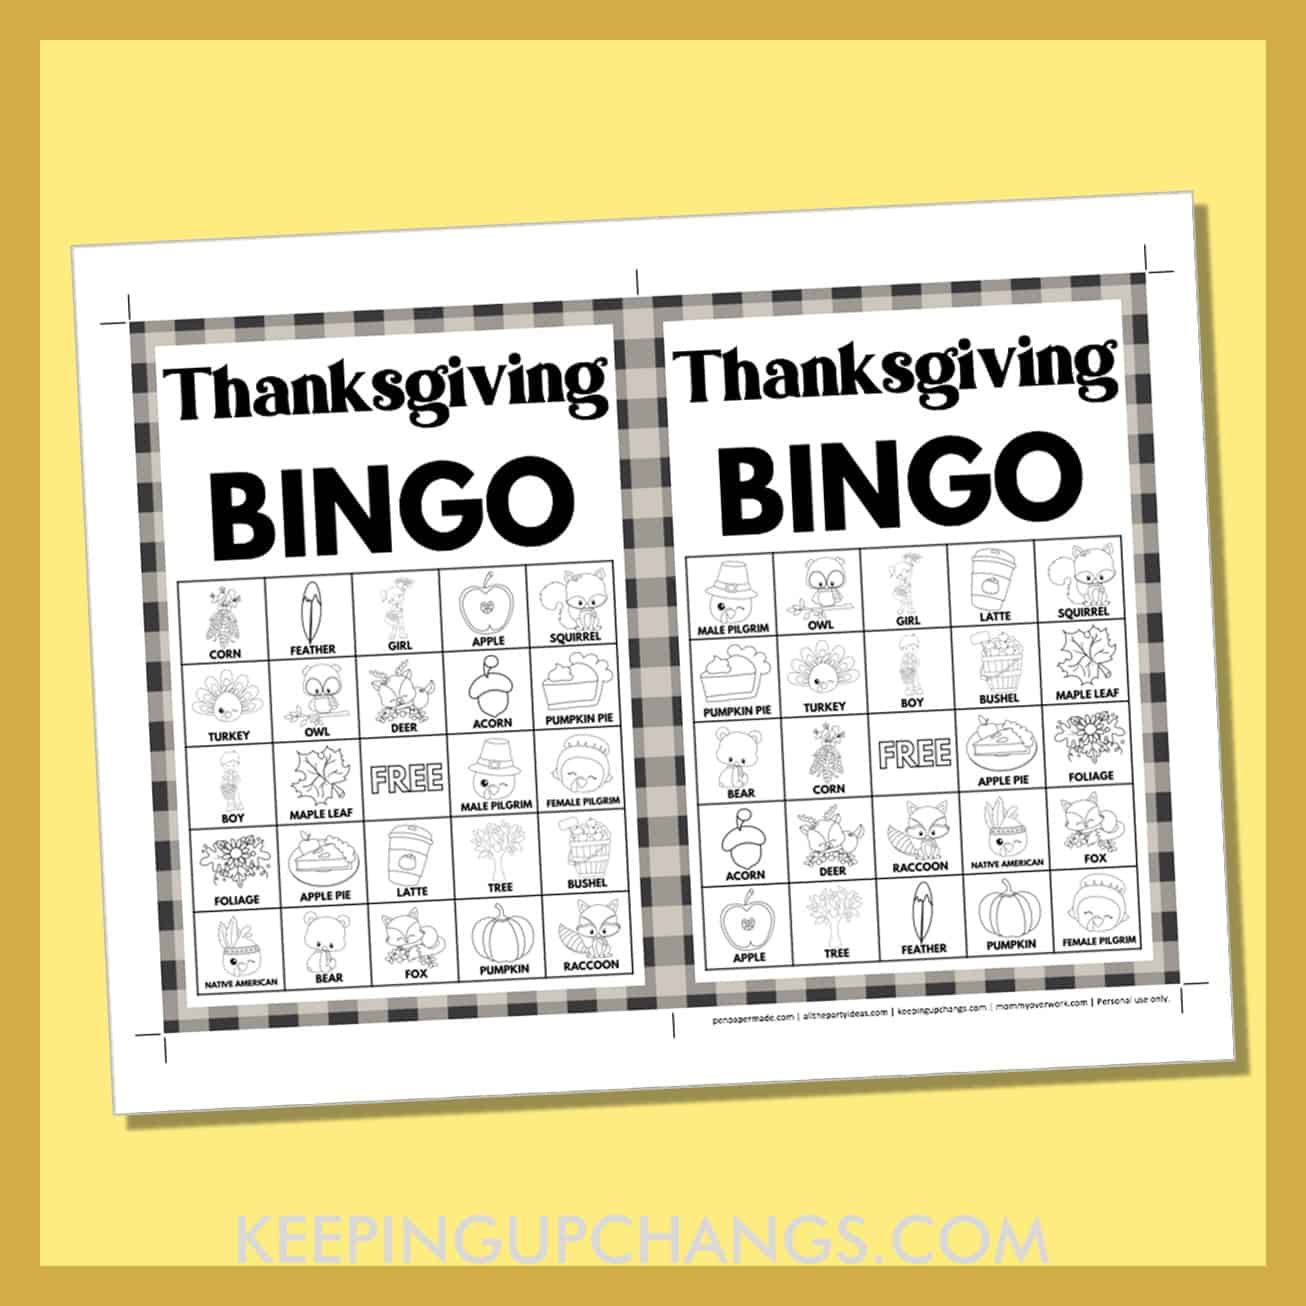 free fall thanksgiving bingo card 5x5 5x7 black white coloring game boards with images and text words.